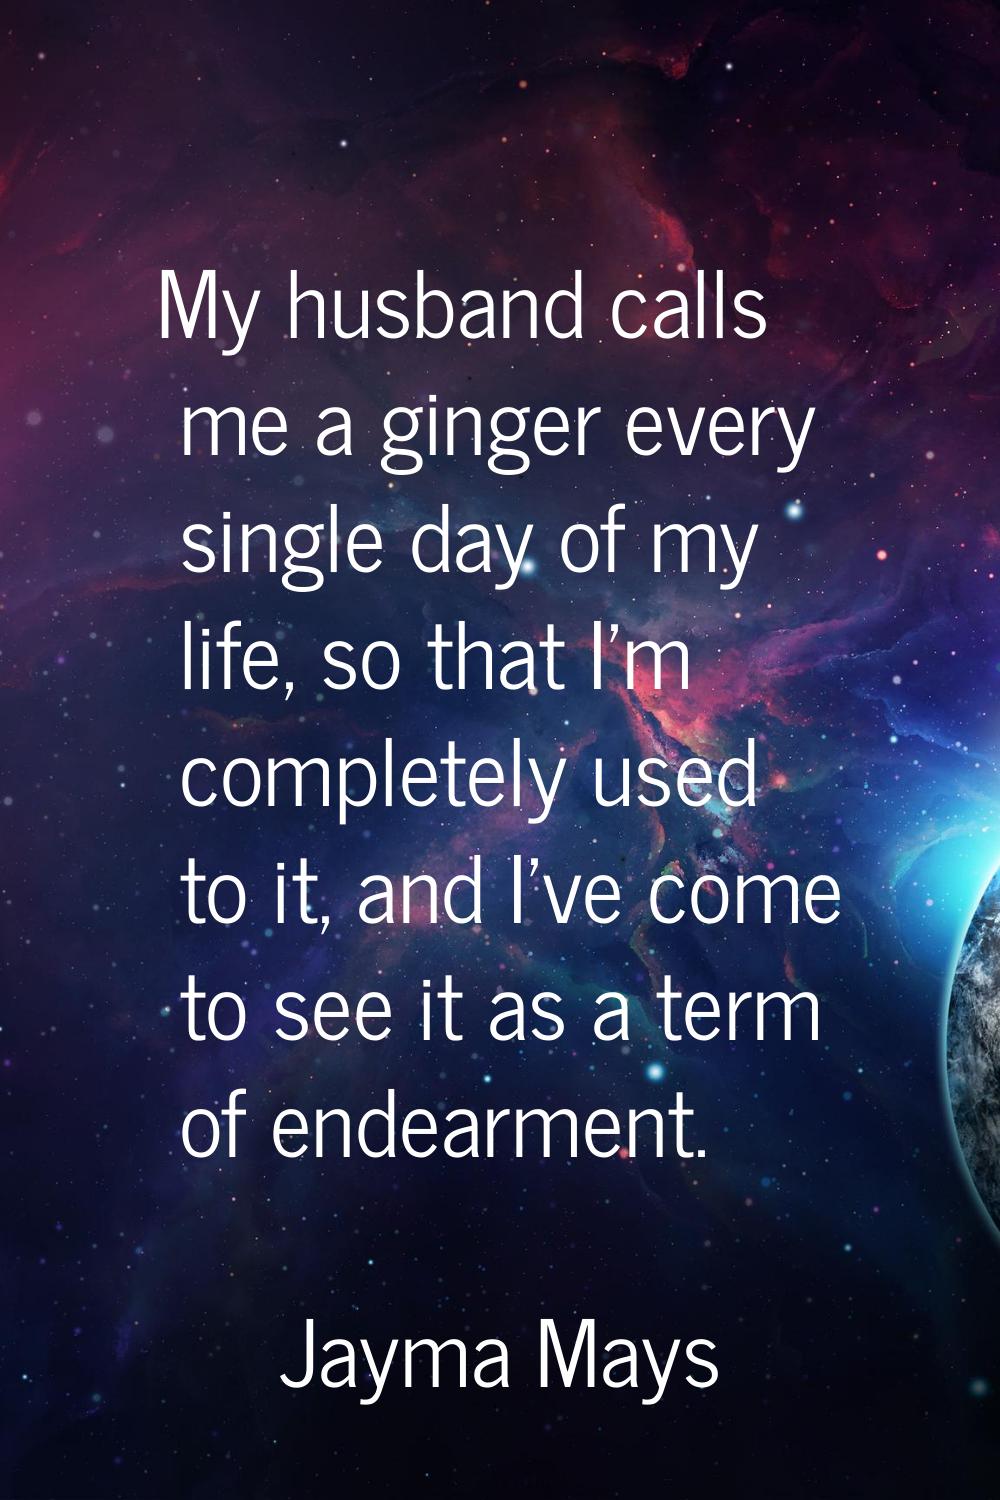 My husband calls me a ginger every single day of my life, so that I'm completely used to it, and I'